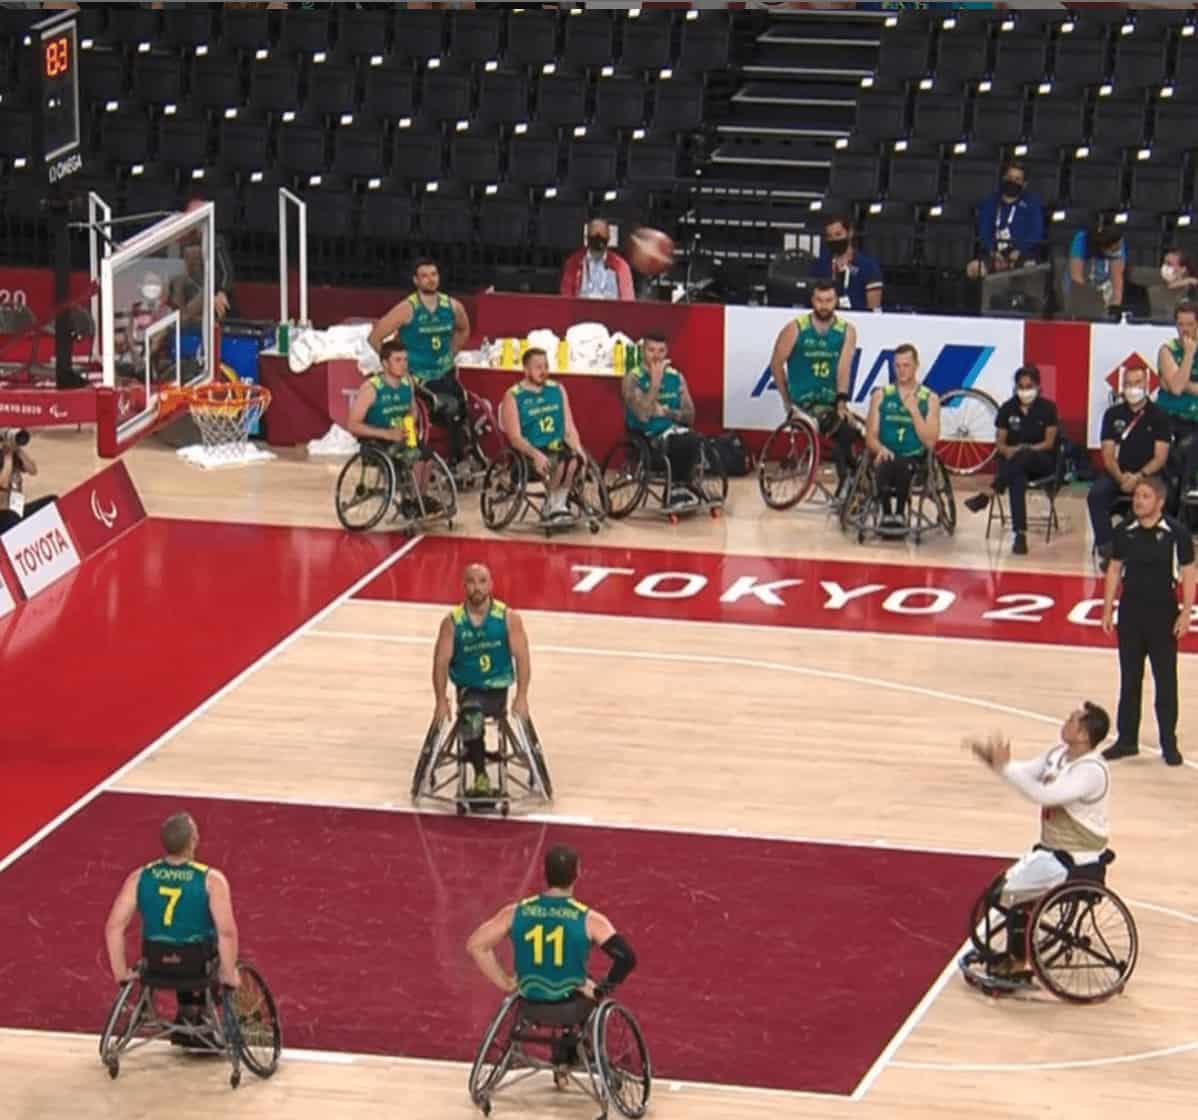 Paralympian shoots the ball in a game of wheelchair basketball at the Paralympics.